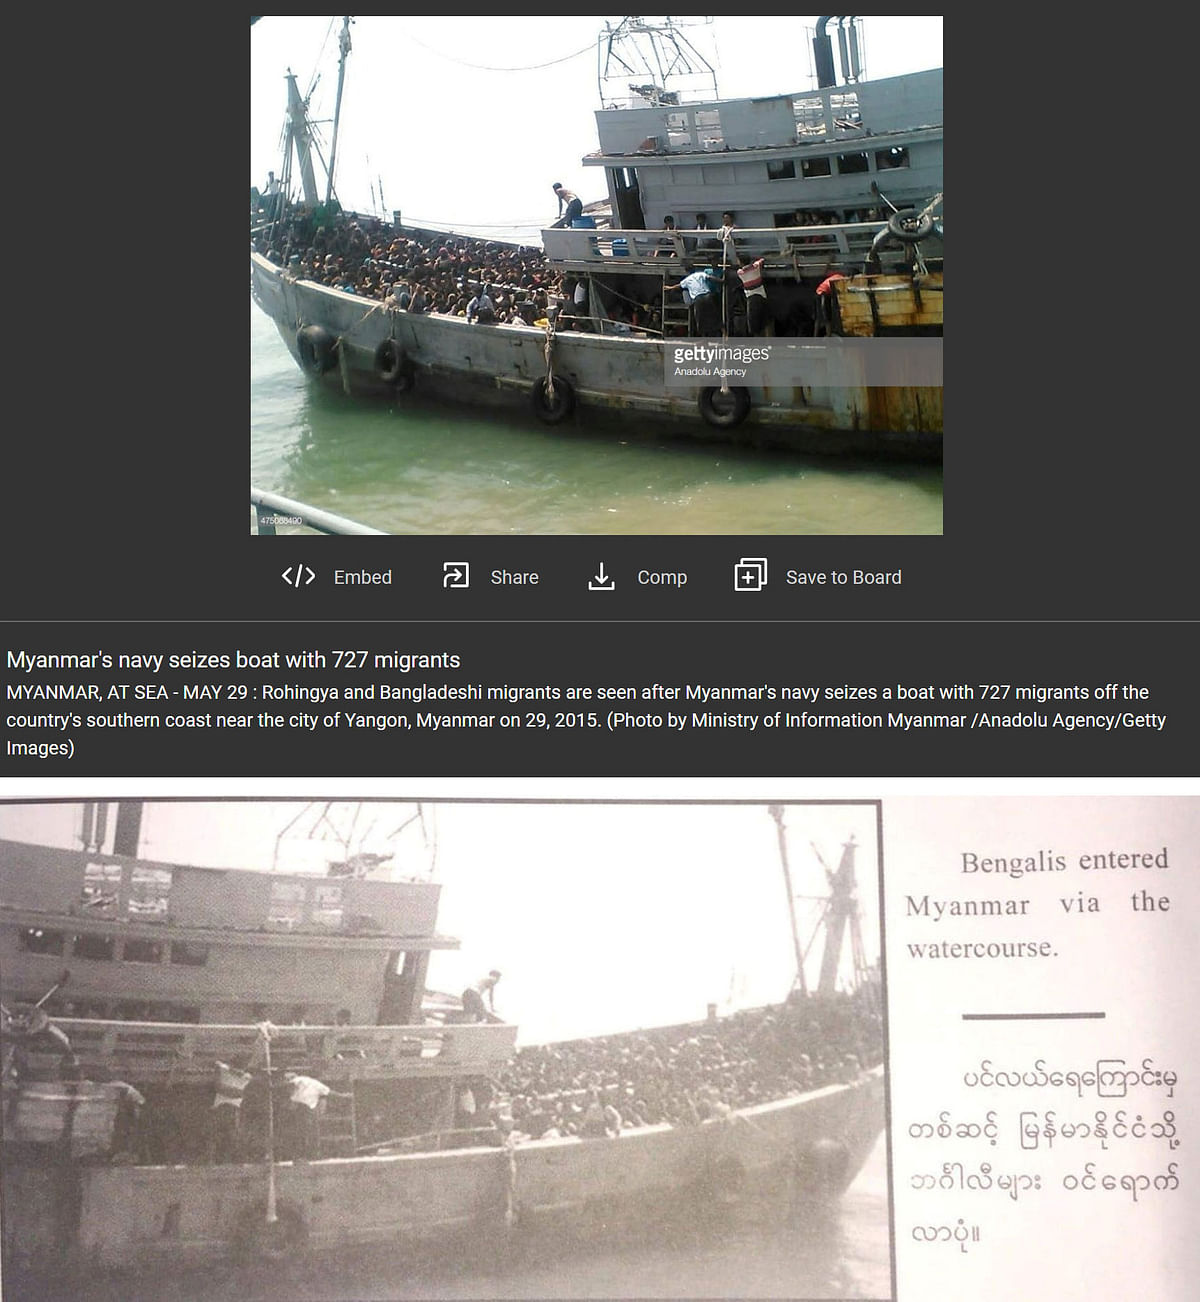 A combination of screenshots shows (top) an image taken from Getty Images depicting Rohingya and Bangladeshi migrants, who were trying to flee Myanmar, after their boat was seized by MyanmarÕs navy, near Yangon, in 2015. The same image (bottom) appears in the Myanmar armyÕs recently published book on the Rohingya, flipped and converted to black-and-white, describing Bengalis entering Myanmar. Photo: Reuters